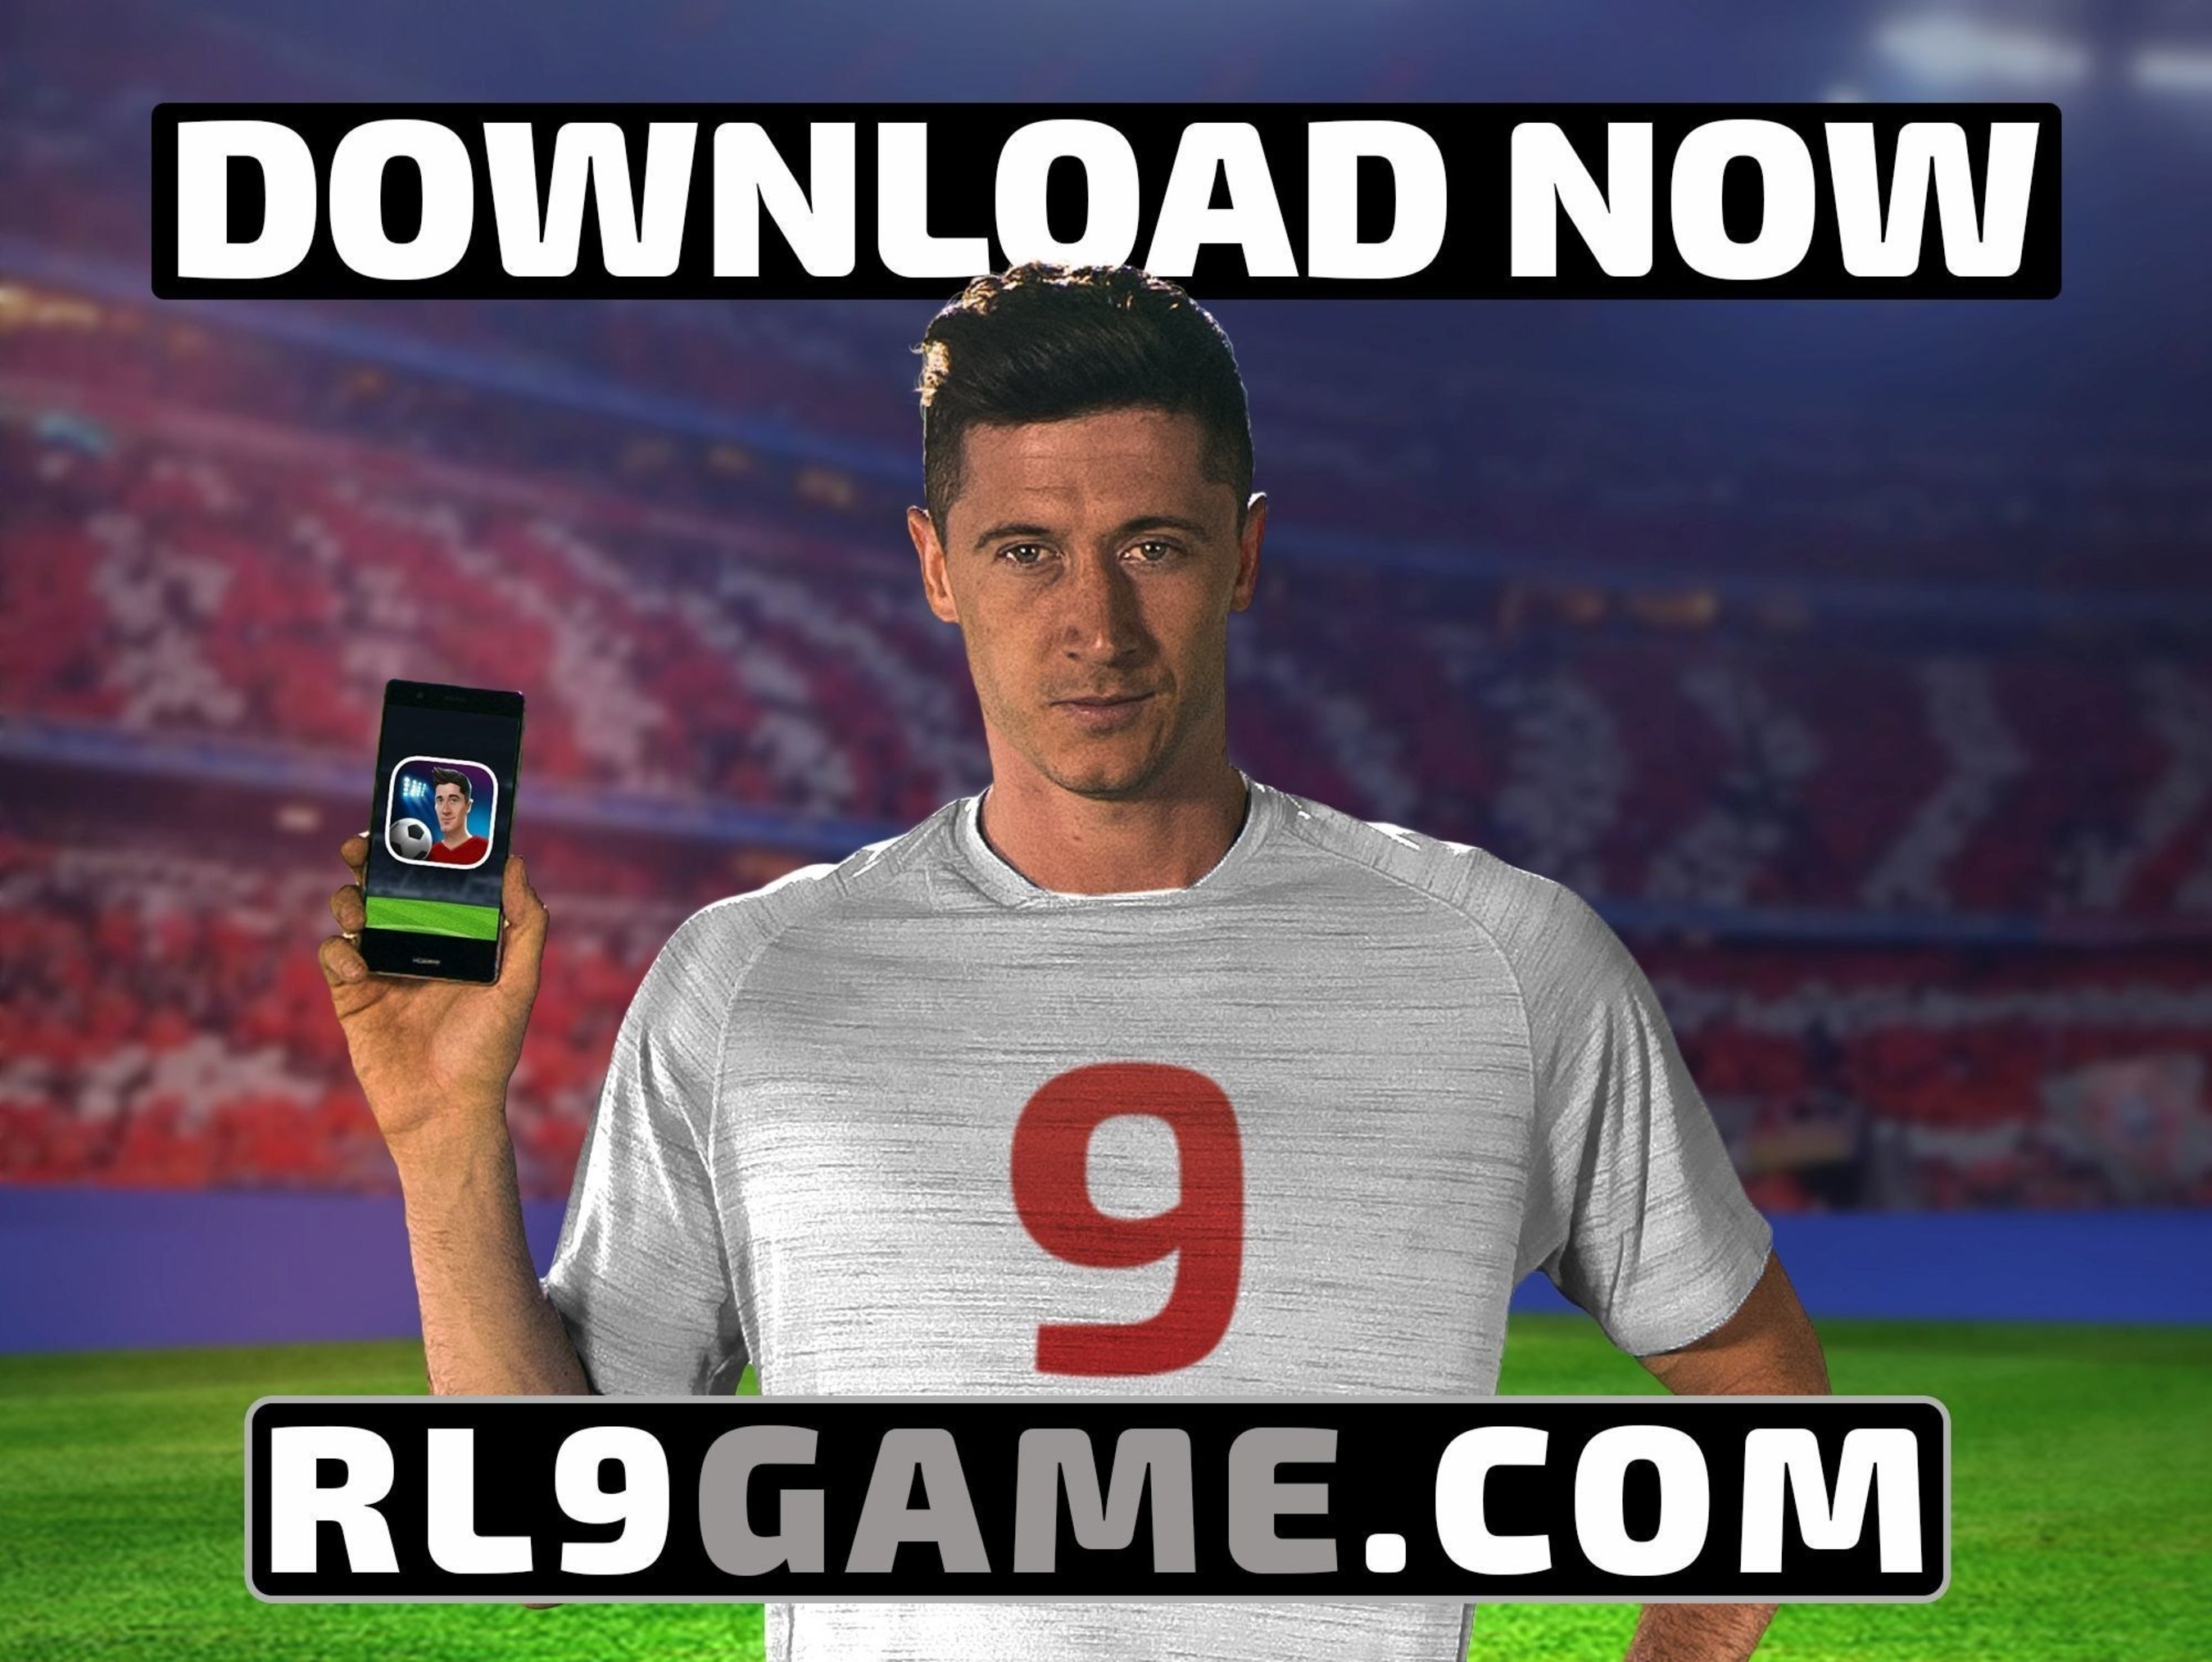 Polish striker Robert Lewandowski and Fuero Games are teaming up ahead of the European championships in France to give fans a taster of what it takes to be a world-class football player. In Lewandowski: Euro Star 2016, available on iOS and Android, they can challenge friends to a keepie-uppie rivalry. "At every warm-up, we do hundreds of keepie-uppies developing ball control skills that give us the decisive edge on the pitch. I hope fans will enjoy the game," Lewandowski said.